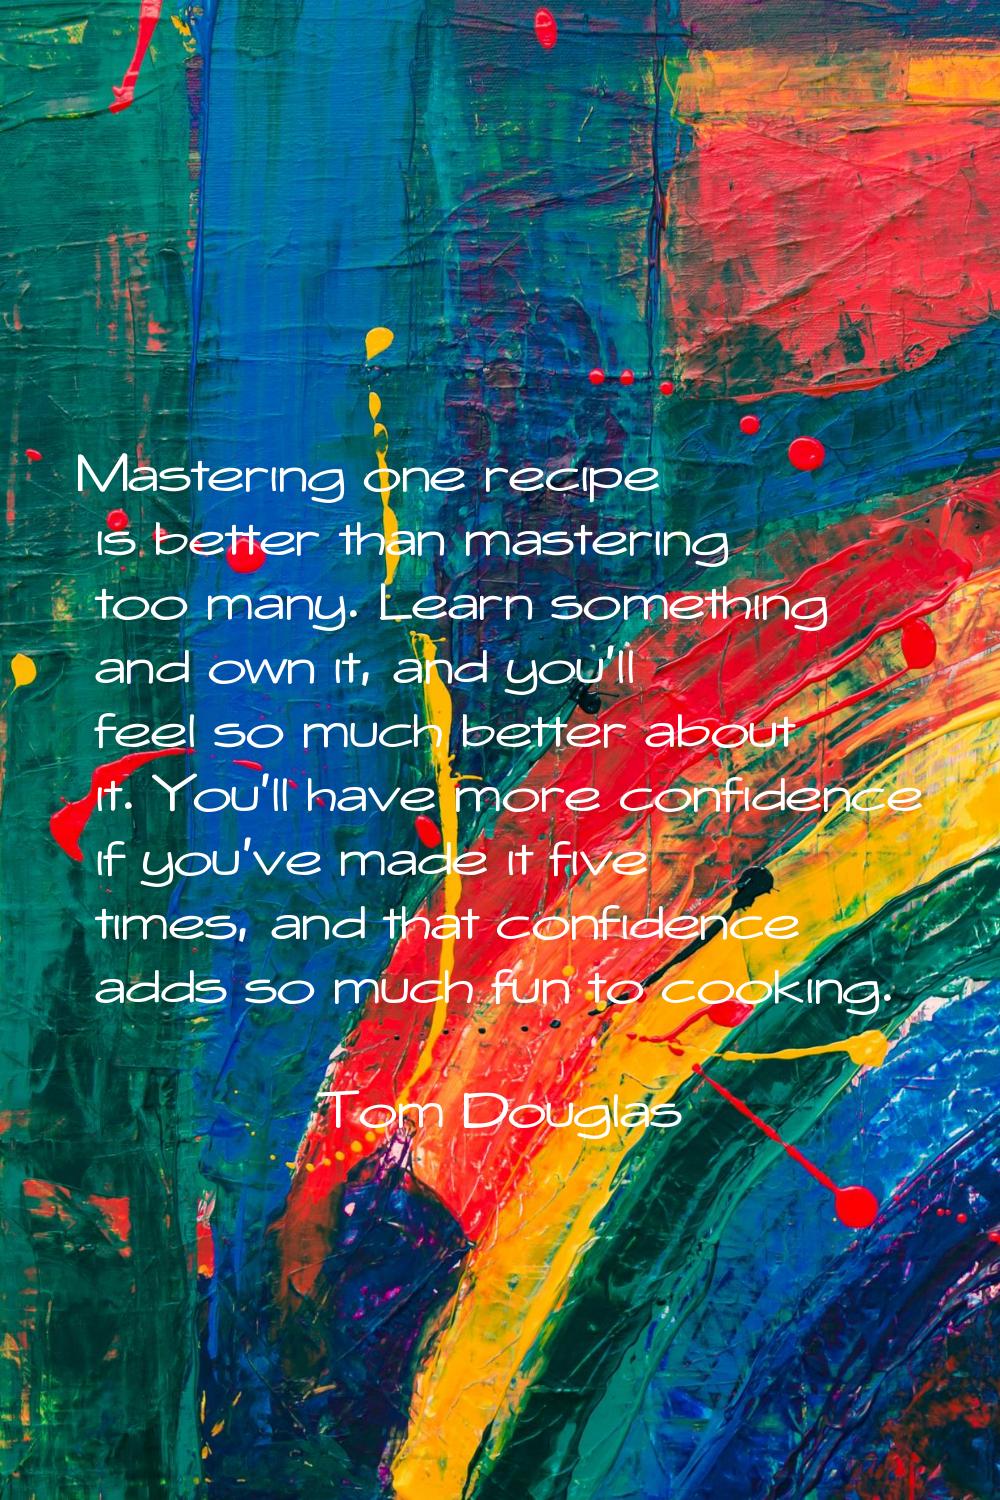 Mastering one recipe is better than mastering too many. Learn something and own it, and you'll feel